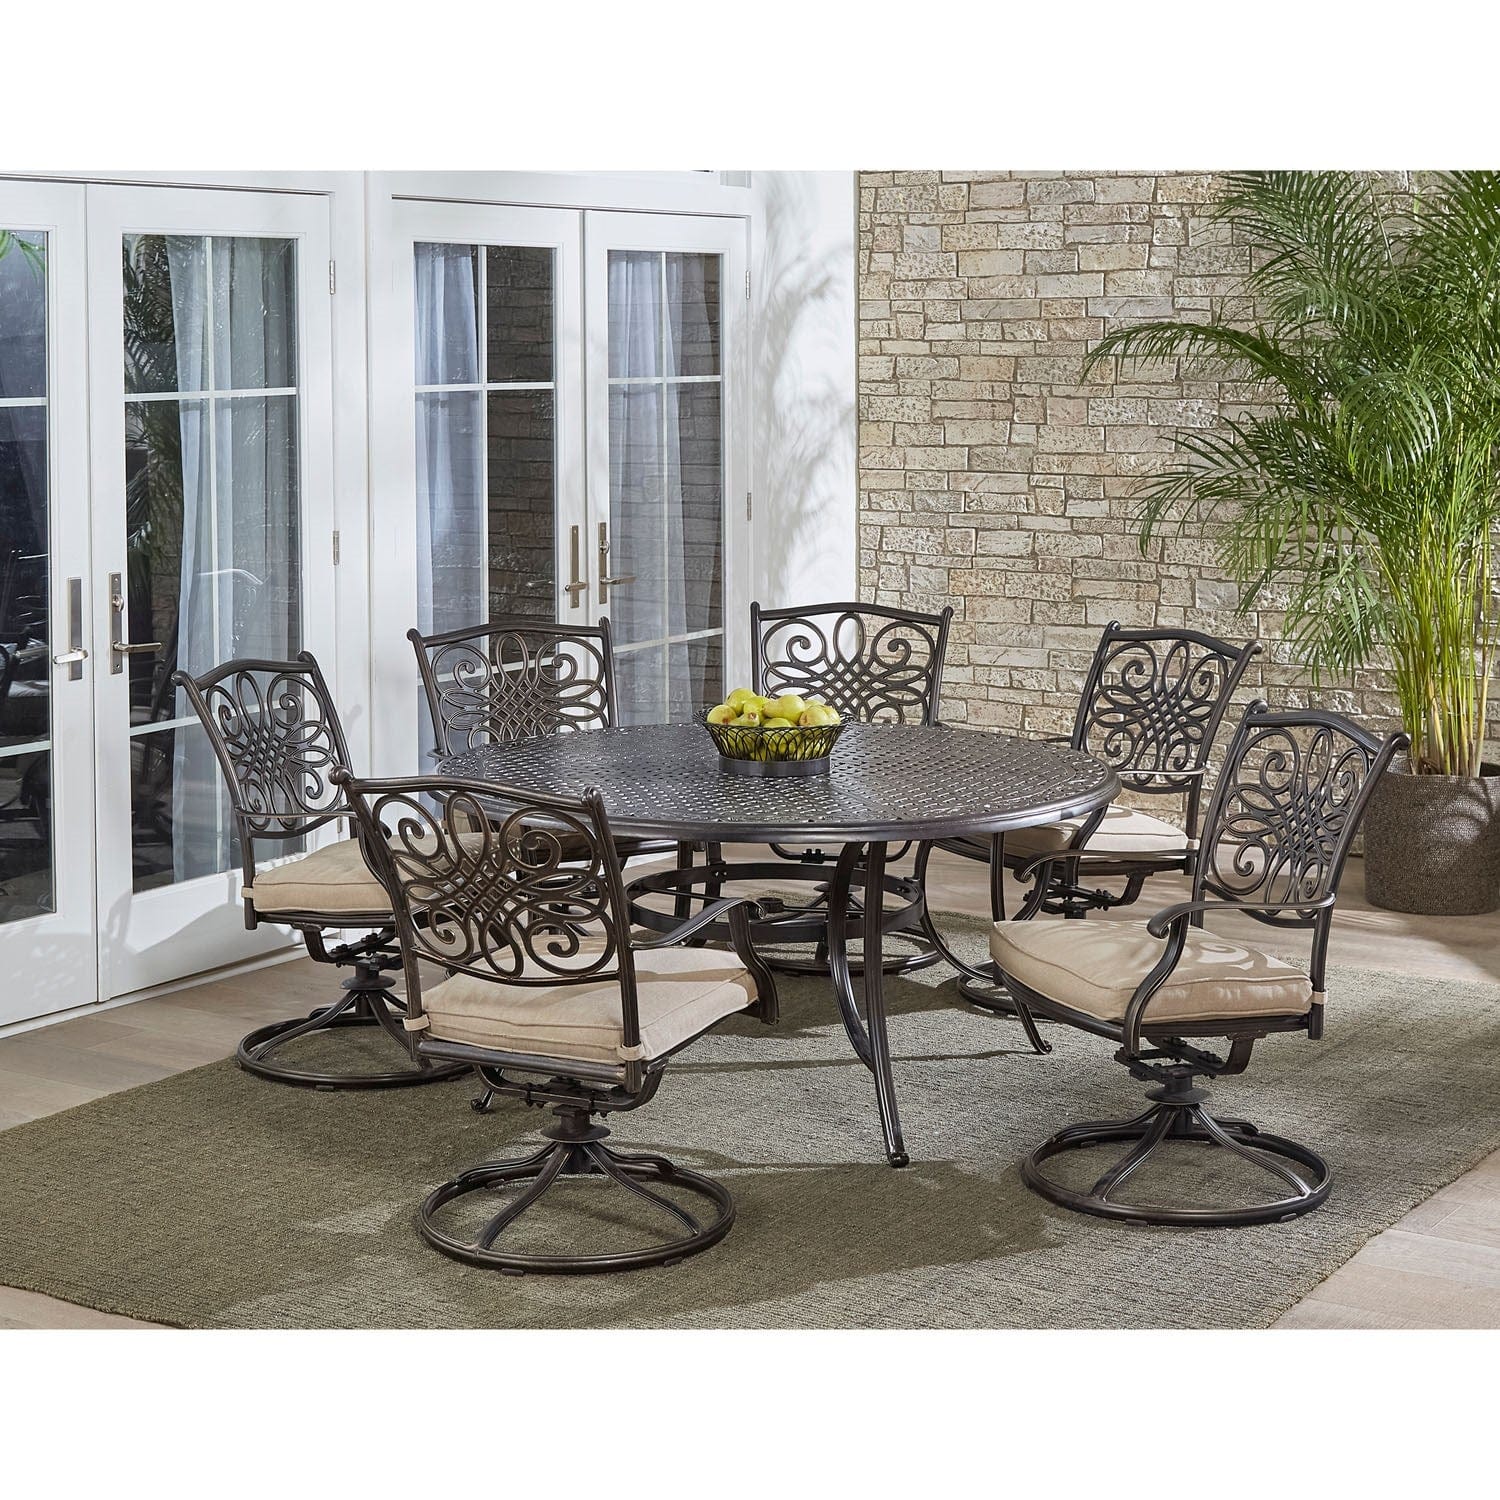 Hanover Outdoor Dining Set Hanover - Traditions 7-Piece Dining Set in Tan with a 60 In. Round Cast-top Table and Six Swivel Rockers - TRADDN7PCSWRD6